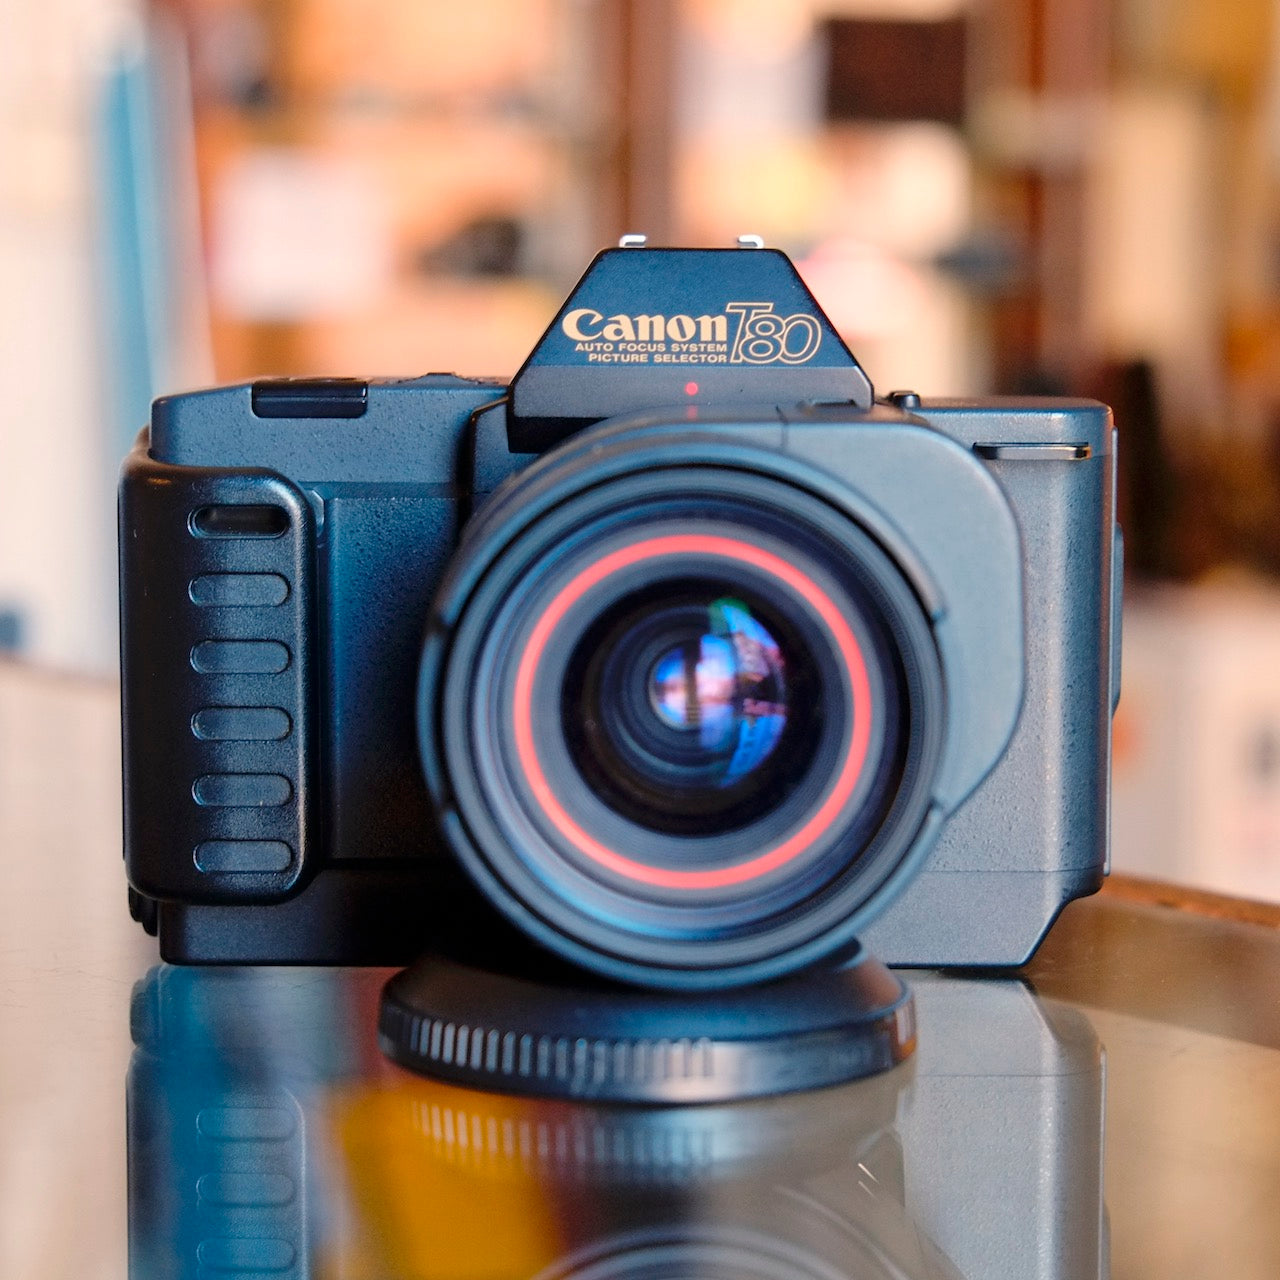 Canon T80 with 35-70mm f3.5-4.5